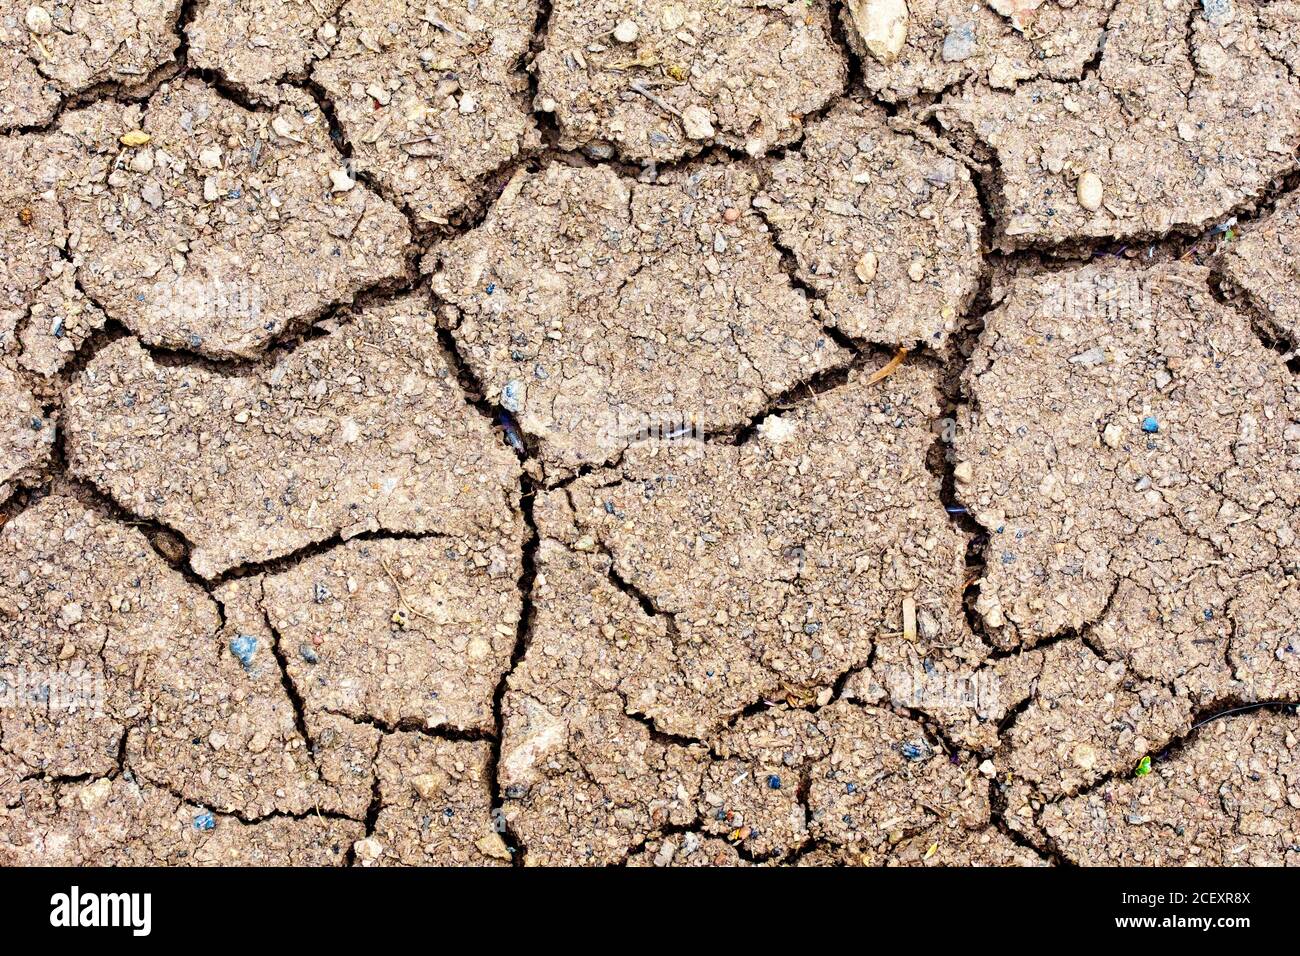 A close up abstract image of a patch of dried, cracked earth or dirt, brought on by a long period of hot weather and a lack of rain. Stock Photo